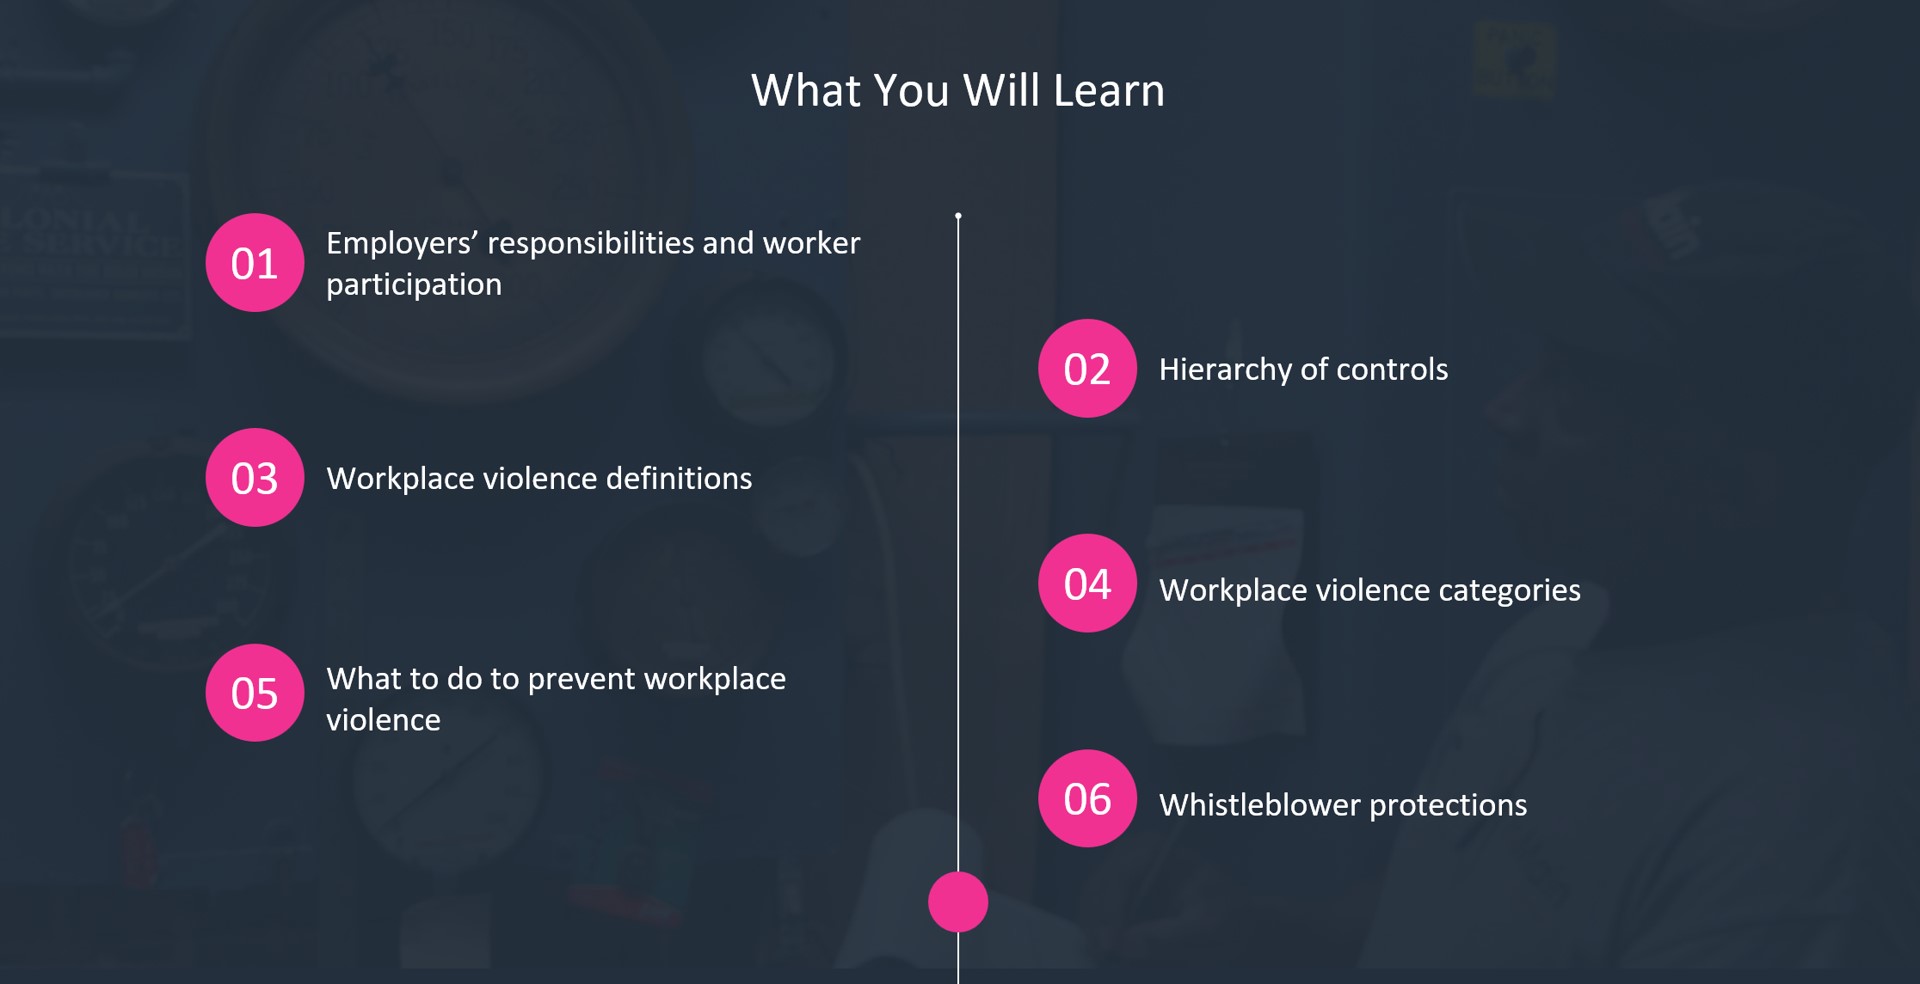 Image entitled "What You Will Learn" with bullet points: Employers’ responsibilities and worker participation; Hierarchy of controls; workplace violence definitions; workplace violence categories; what to do to prevent workplace violence; whistleblower protections